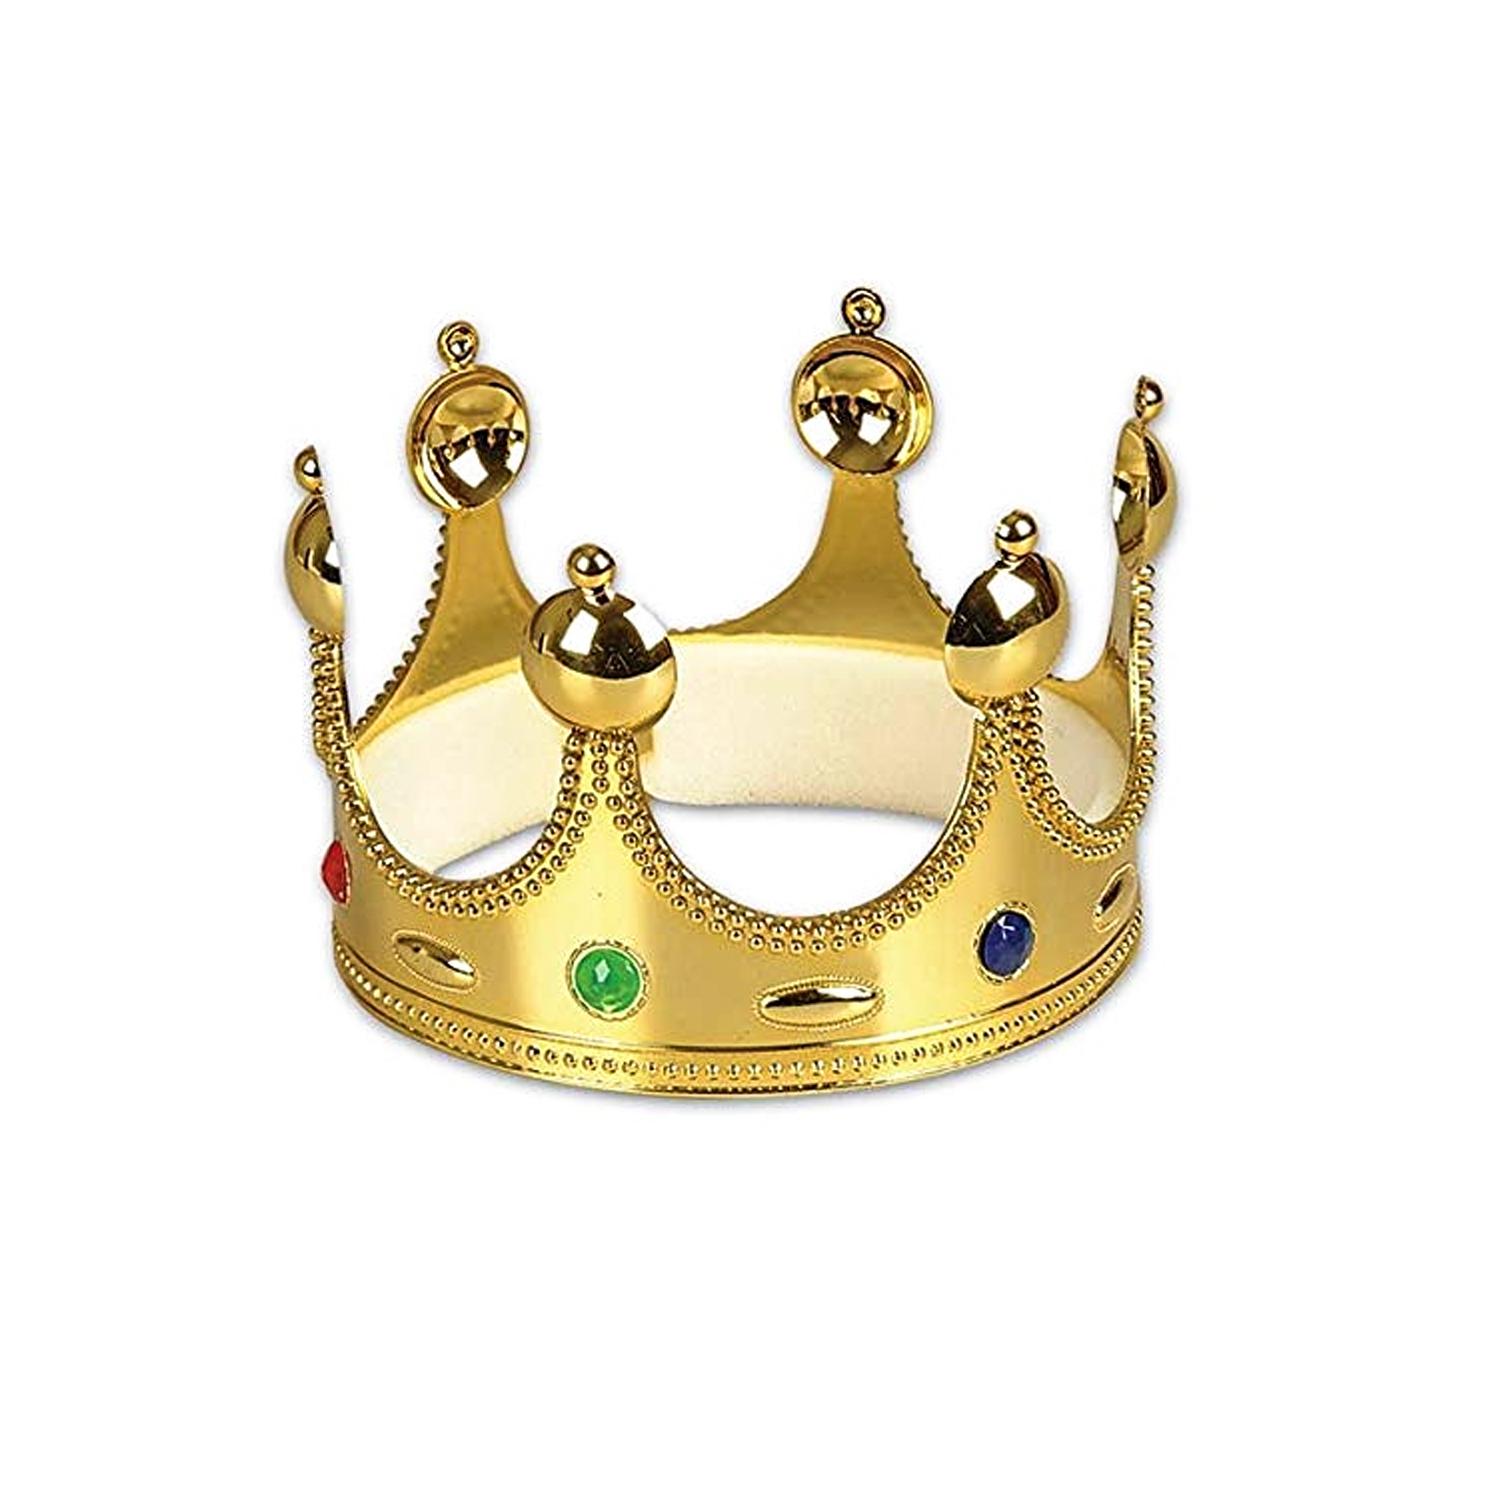 MAJESTIC GOLD CROWN